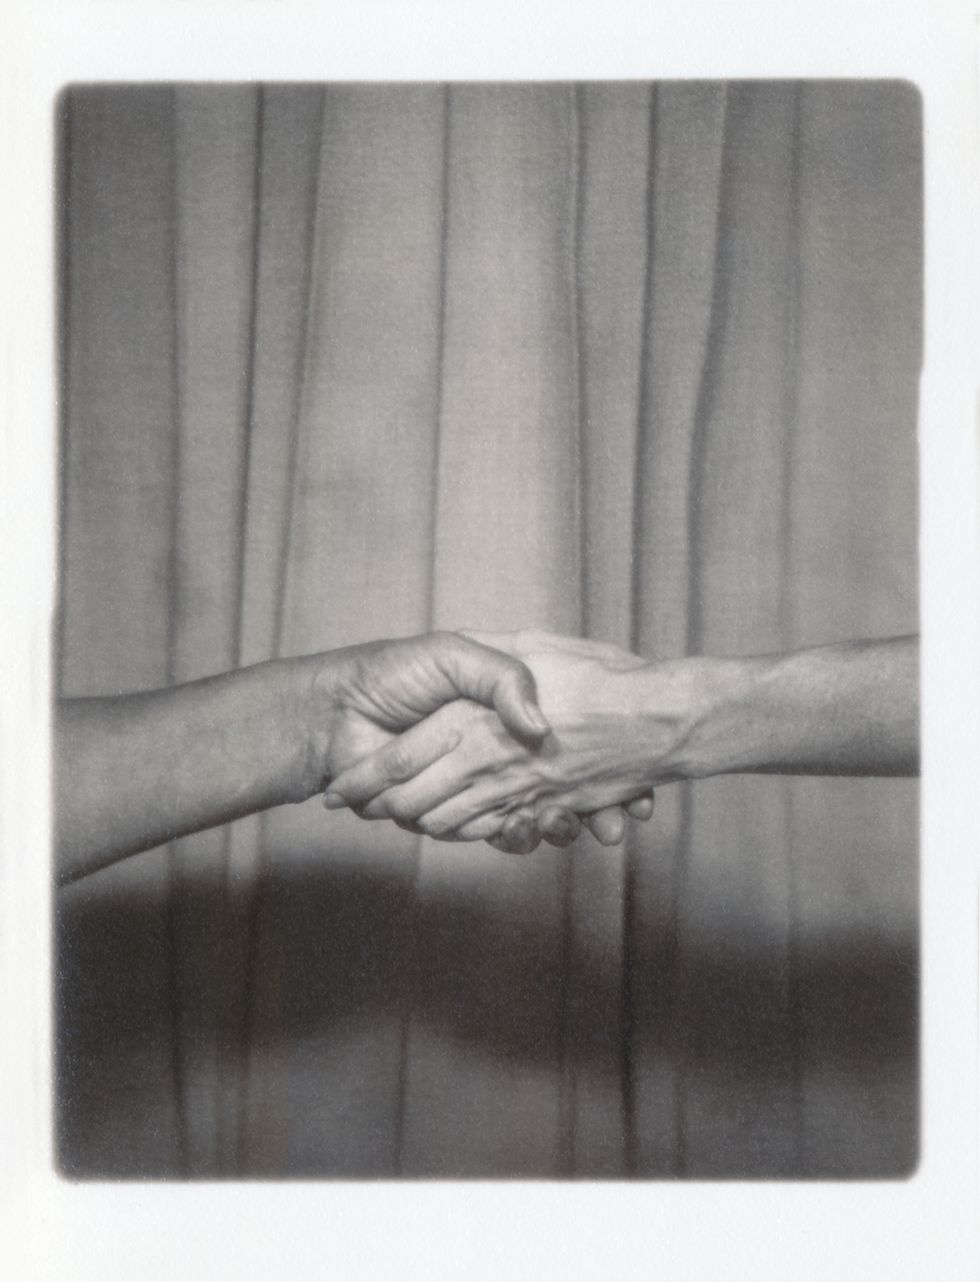 two people shaking hands conceptual image for partnership, networking and friendship vintage style photograph in black and white